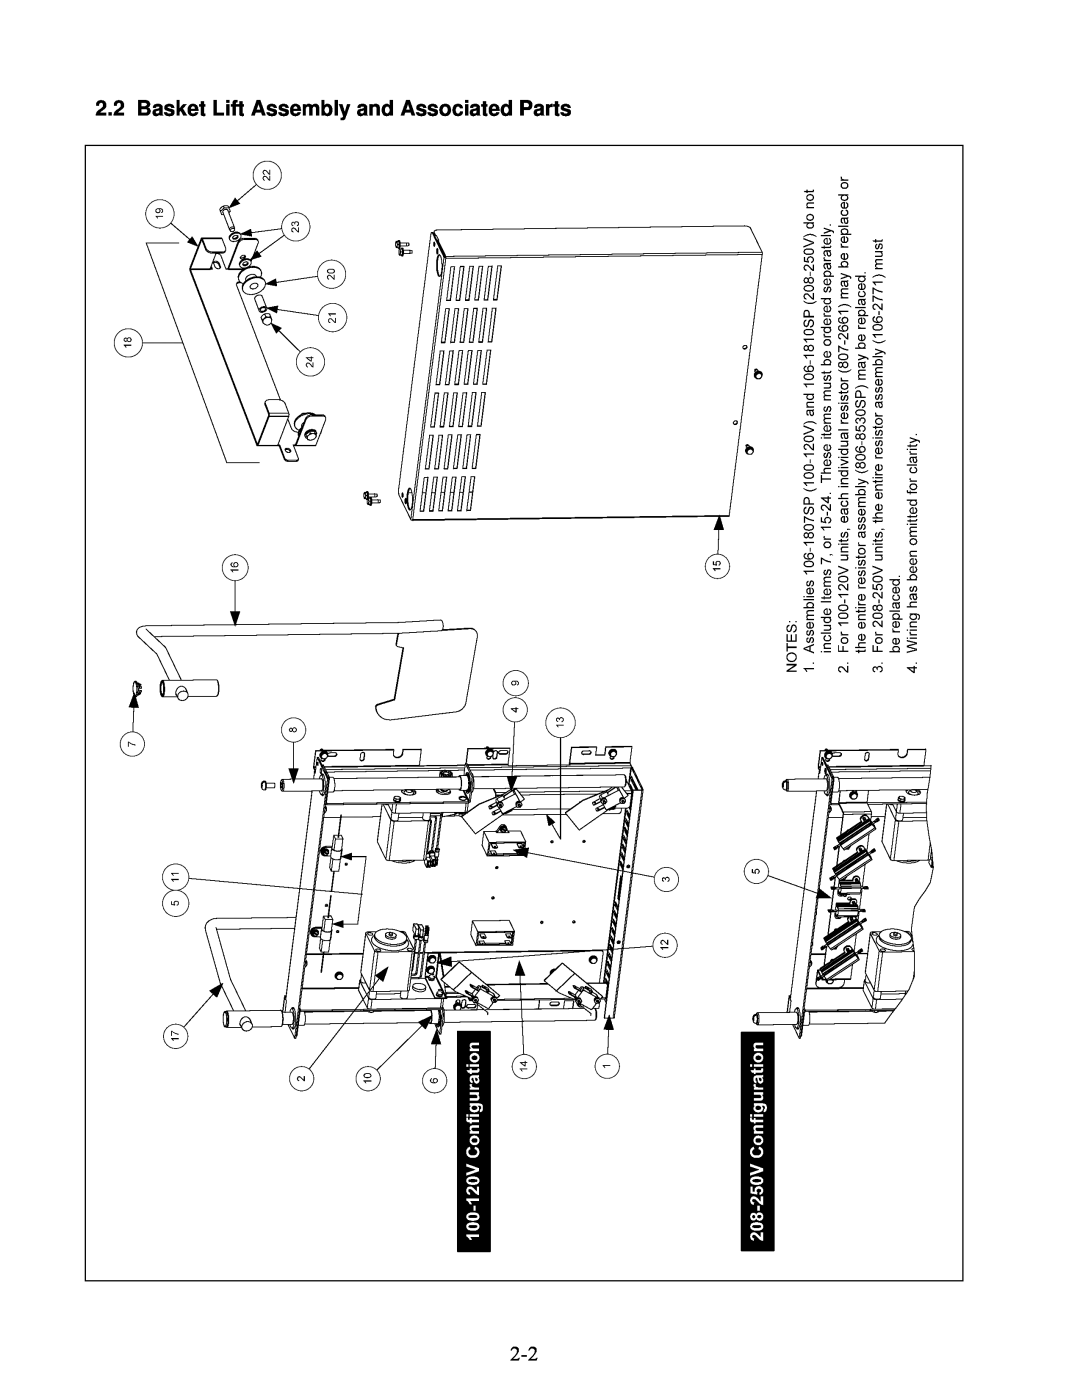 Frymaster 8196345 manual Basket Lift Assembly and Associated Parts 